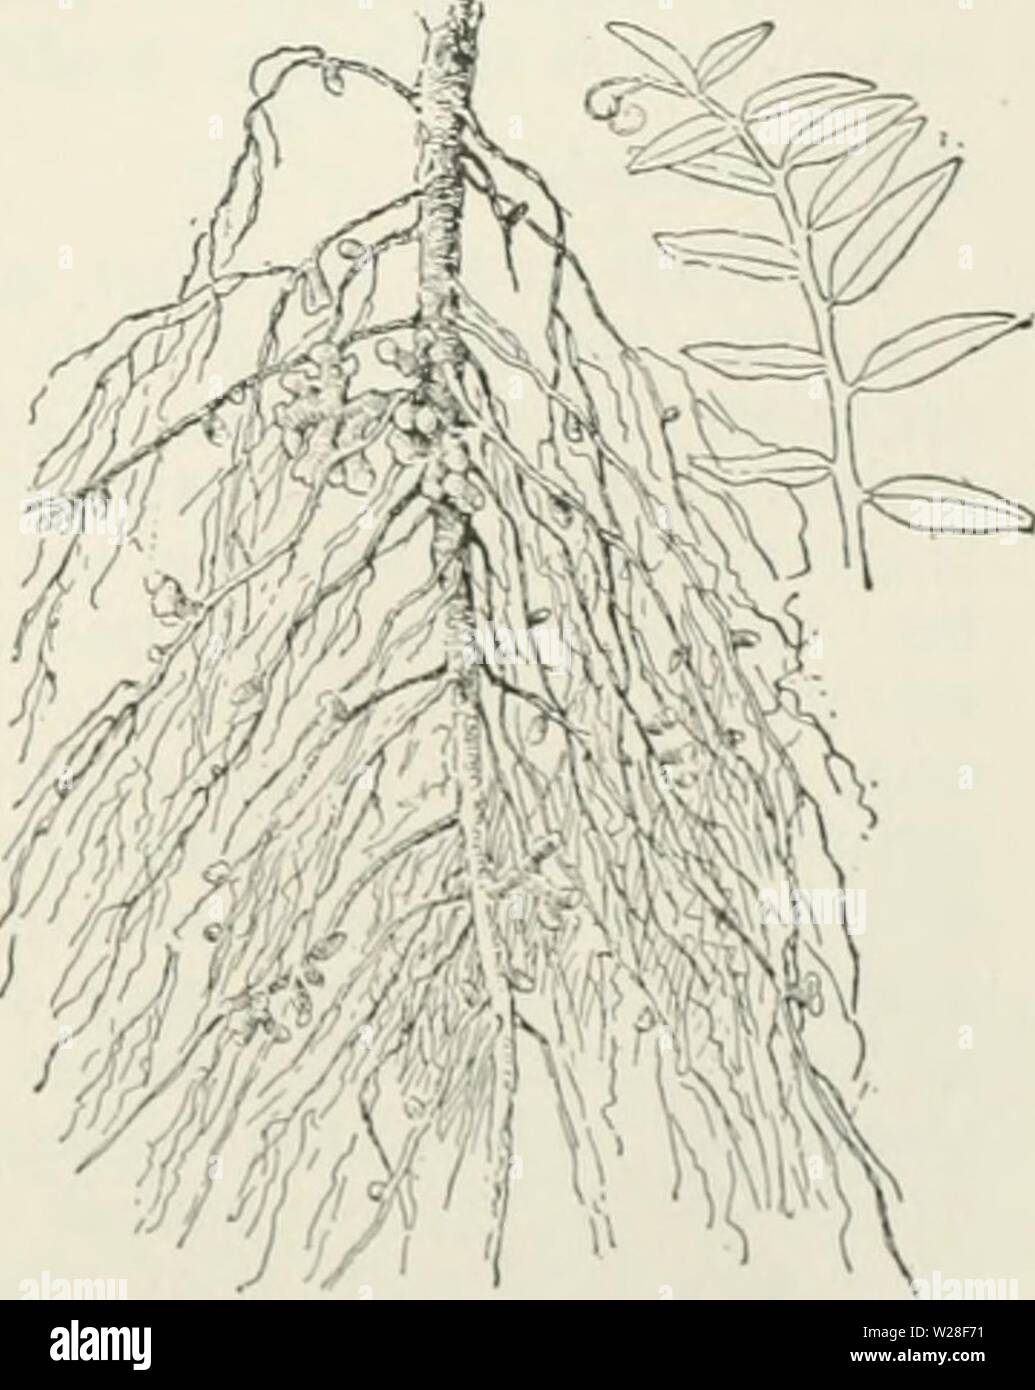 Archive image from page 442 of Cyclopedia of farm crops . Cyclopedia of farm crops : a popular survey of crops and crop-making methods in the United States and Canada  cyclopediaoffarm00bailuoft Year: 1922, c1907  Fig. 591. Root nodules. Black medic (Medicago lupulina). Two and one-half times natural size. form, Moore has recently changed the name to Pseudomonas radicicola, though the relation of the cilia to the organism is not very clearly known, in consequence of which there may be some uncer- tainty as to the appropriateness of this name. The larger rod-like form is 1.5 m to 5 m long by 0. Stock Photo